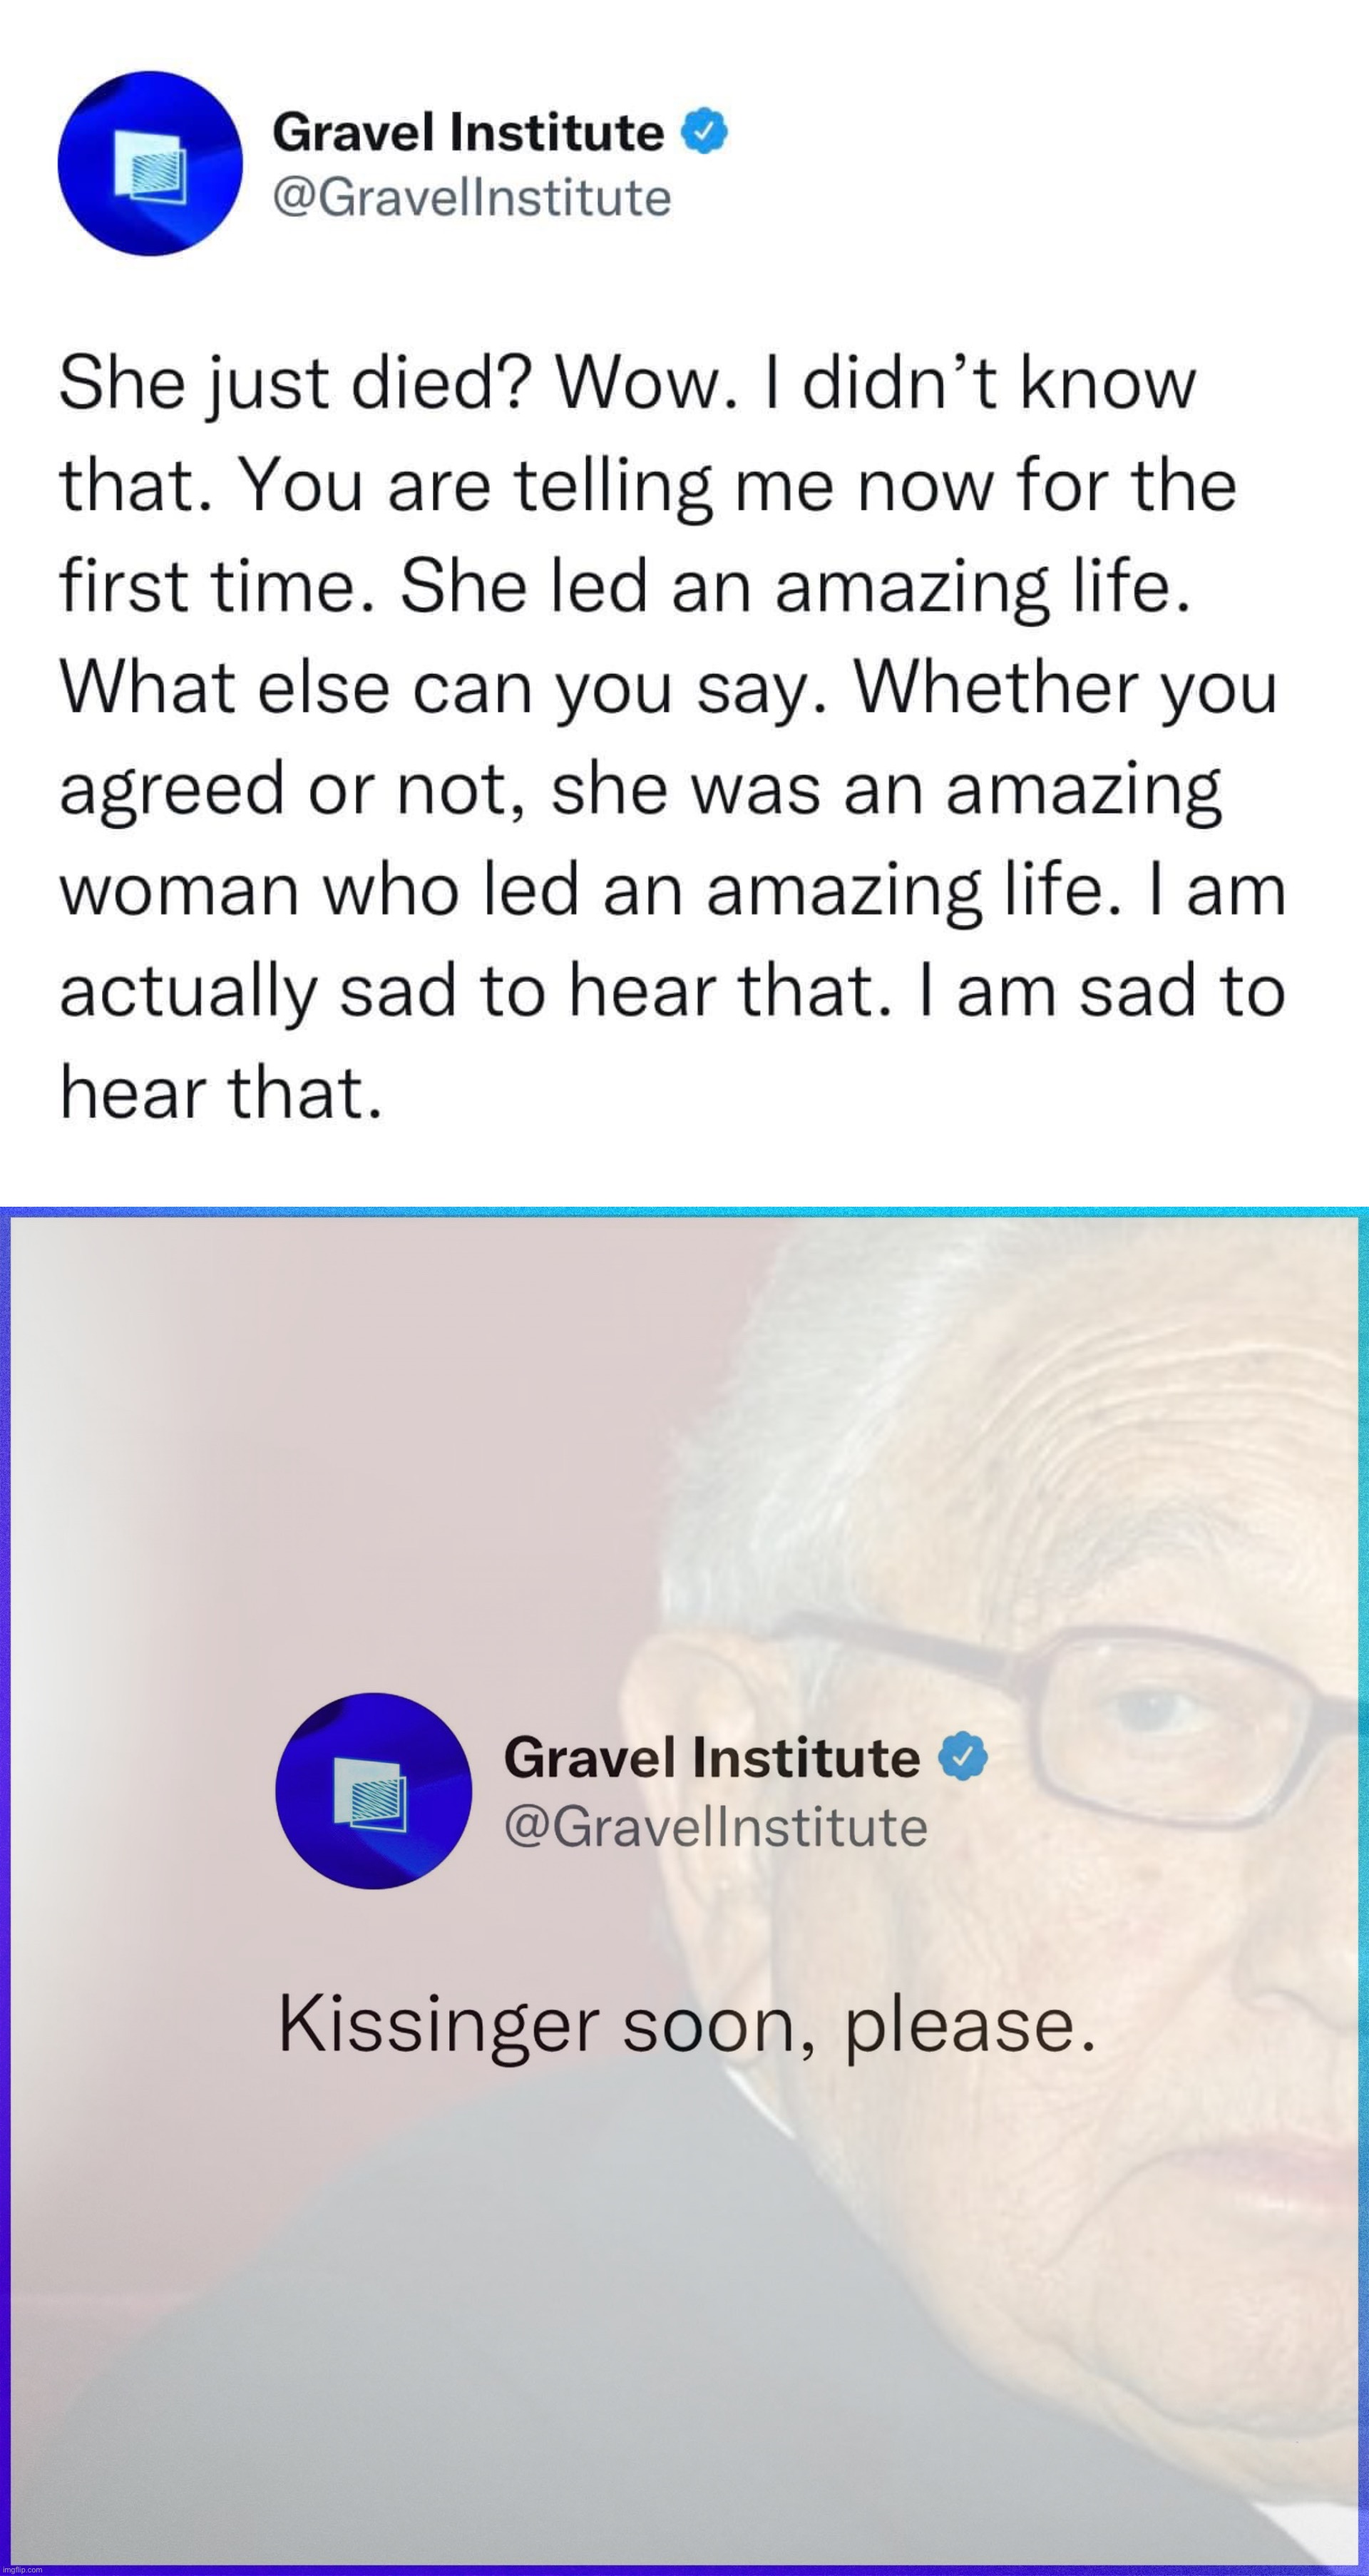 The Gravel Institute weighs in. (That’s pronounced gruh-VELL.) | image tagged in gravel institute weighs in on queen elizabeth ii,gravel,institute,weighs,in,queen elizabeth | made w/ Imgflip meme maker